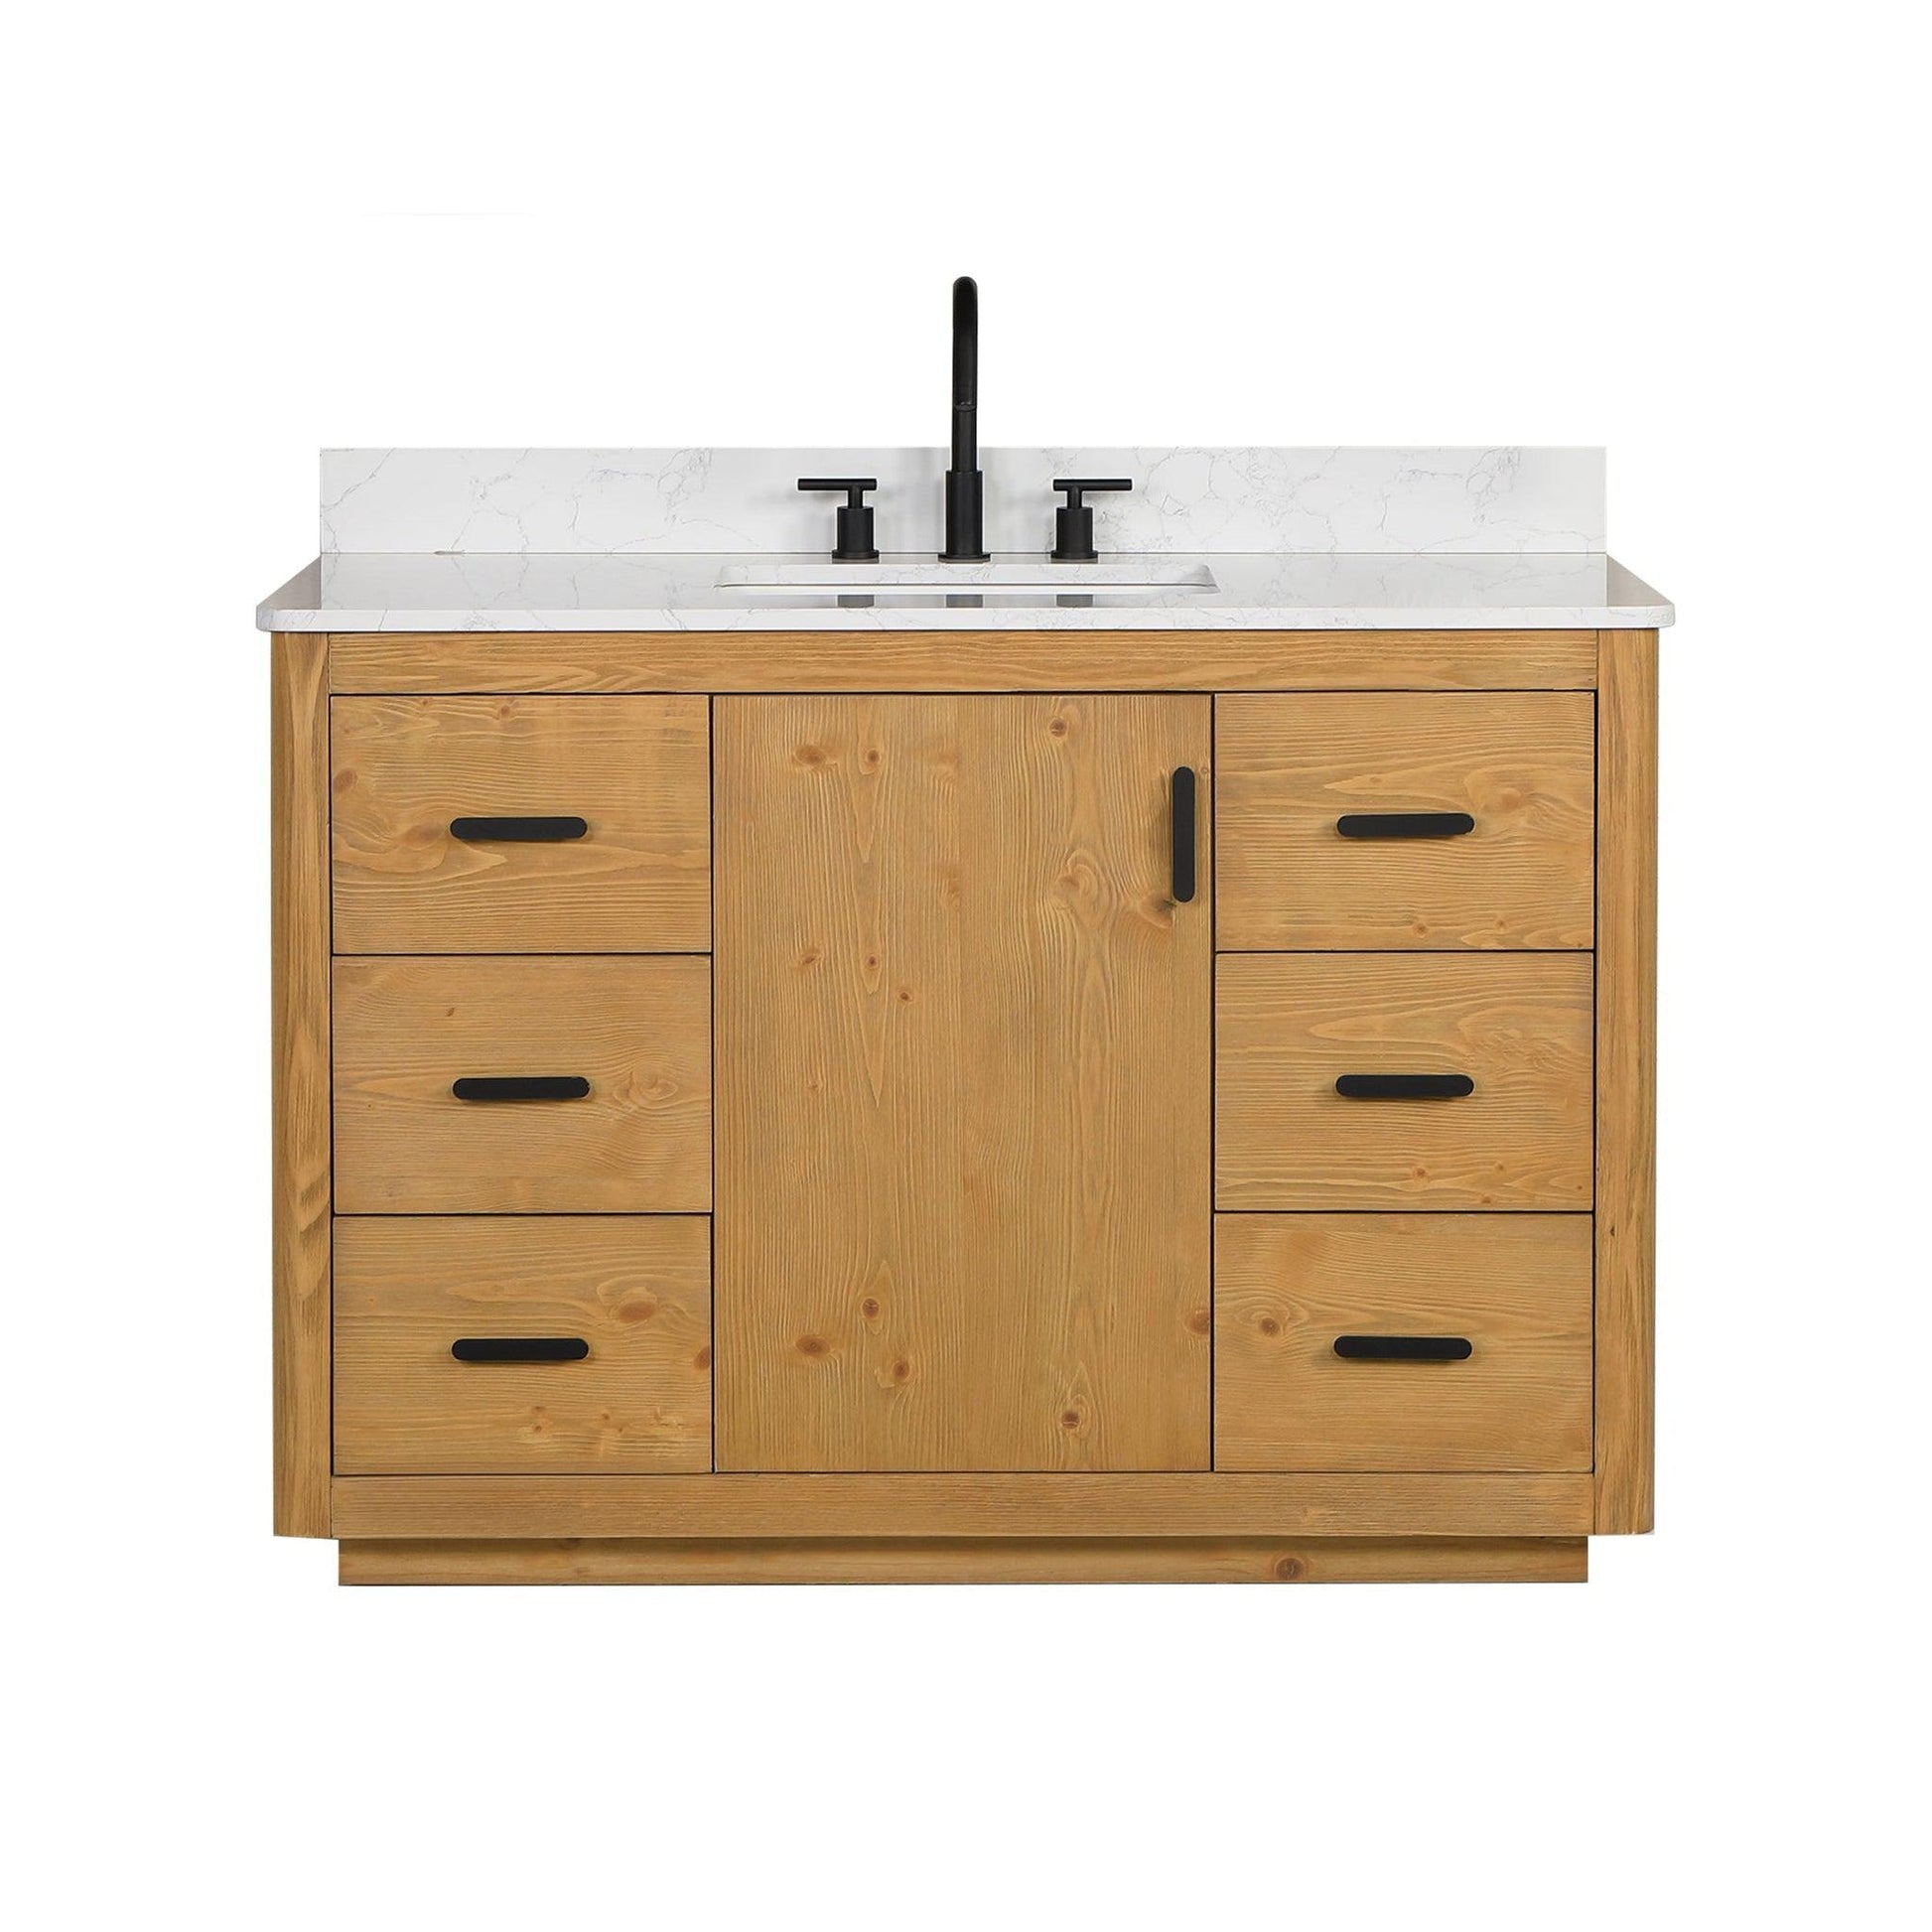 Perla 48 Single Bathroom Vanity in Natural Wood with Grain White Composite Stone Countertop Without Mirror